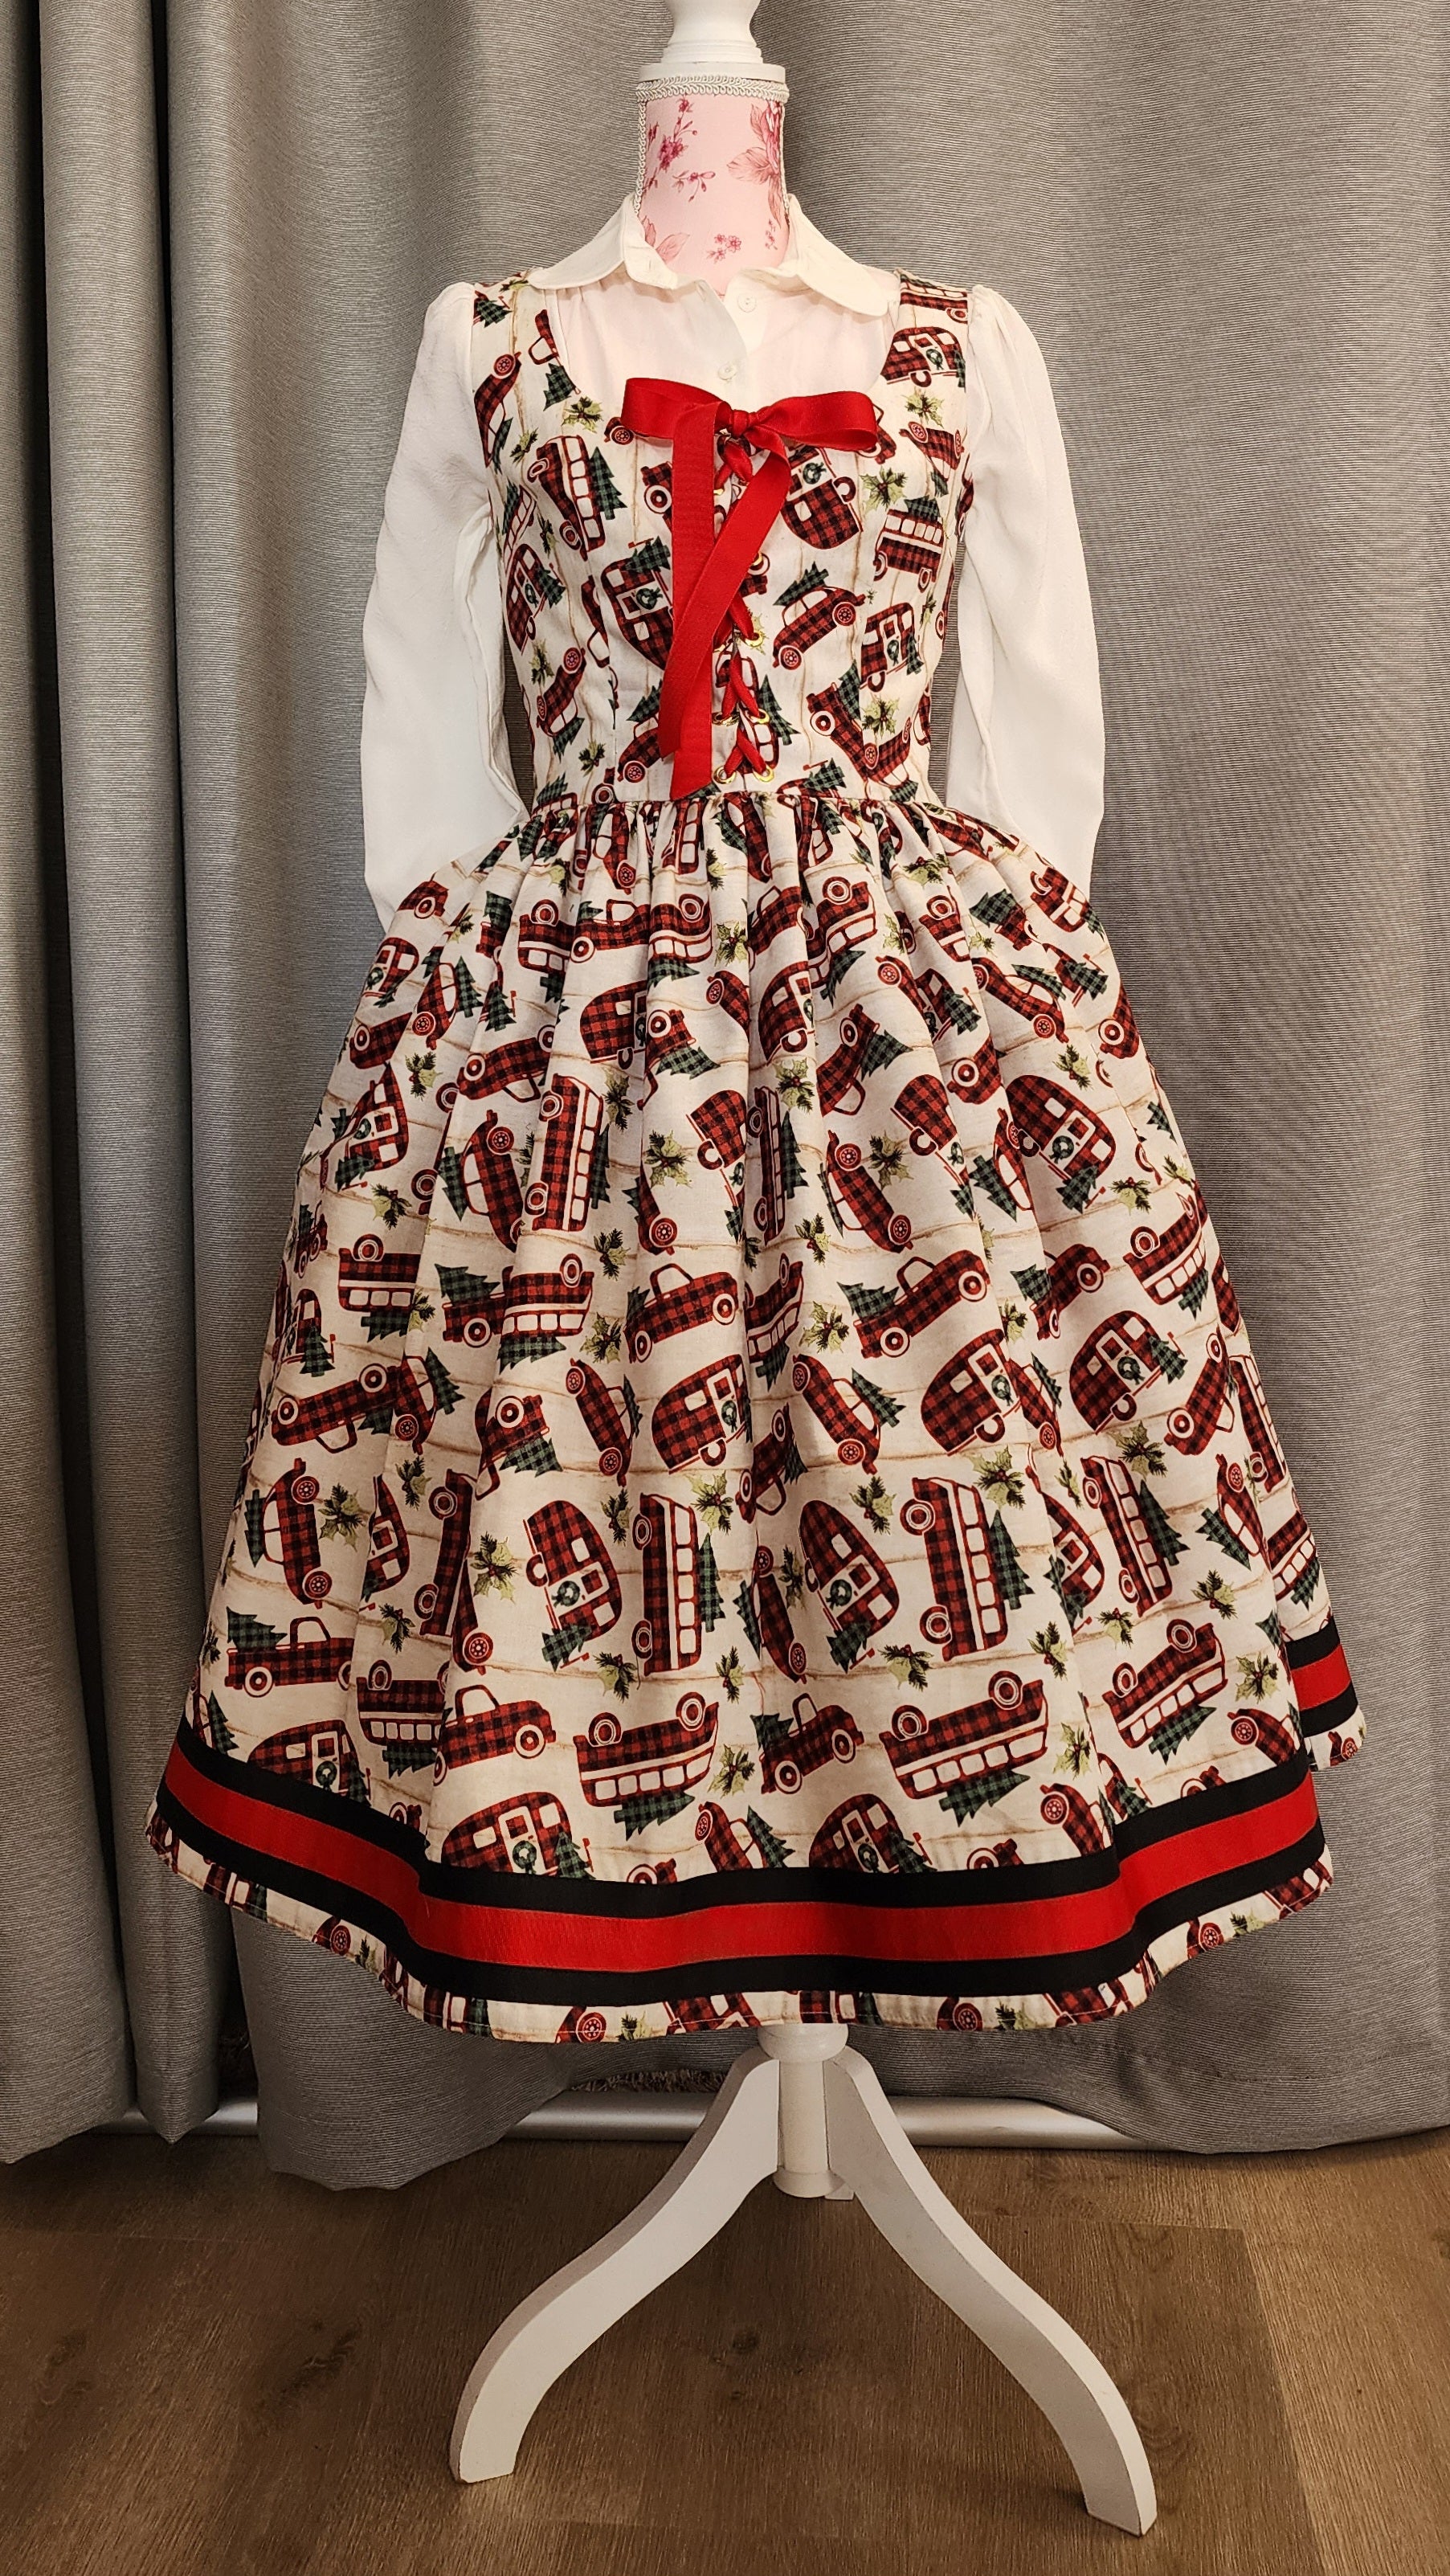 Novelty Volkswagen Camper Print Corset Lace Cotton Dress by Hollyville